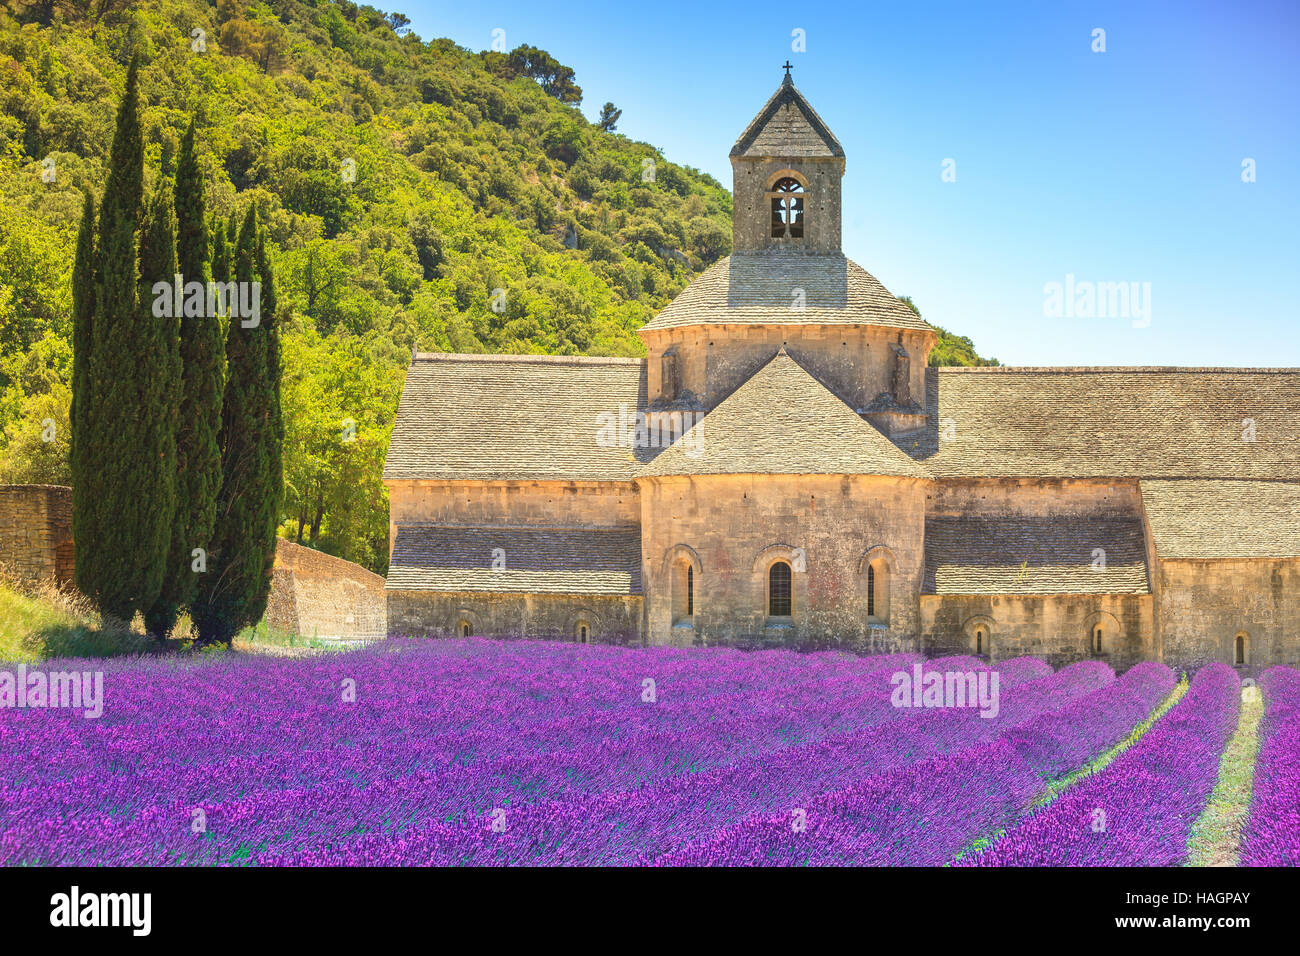 Abbey of Senanque and blooming rows lavender flowers. Gordes, Luberon, Vaucluse, Provence, France, Europe. Stock Photo